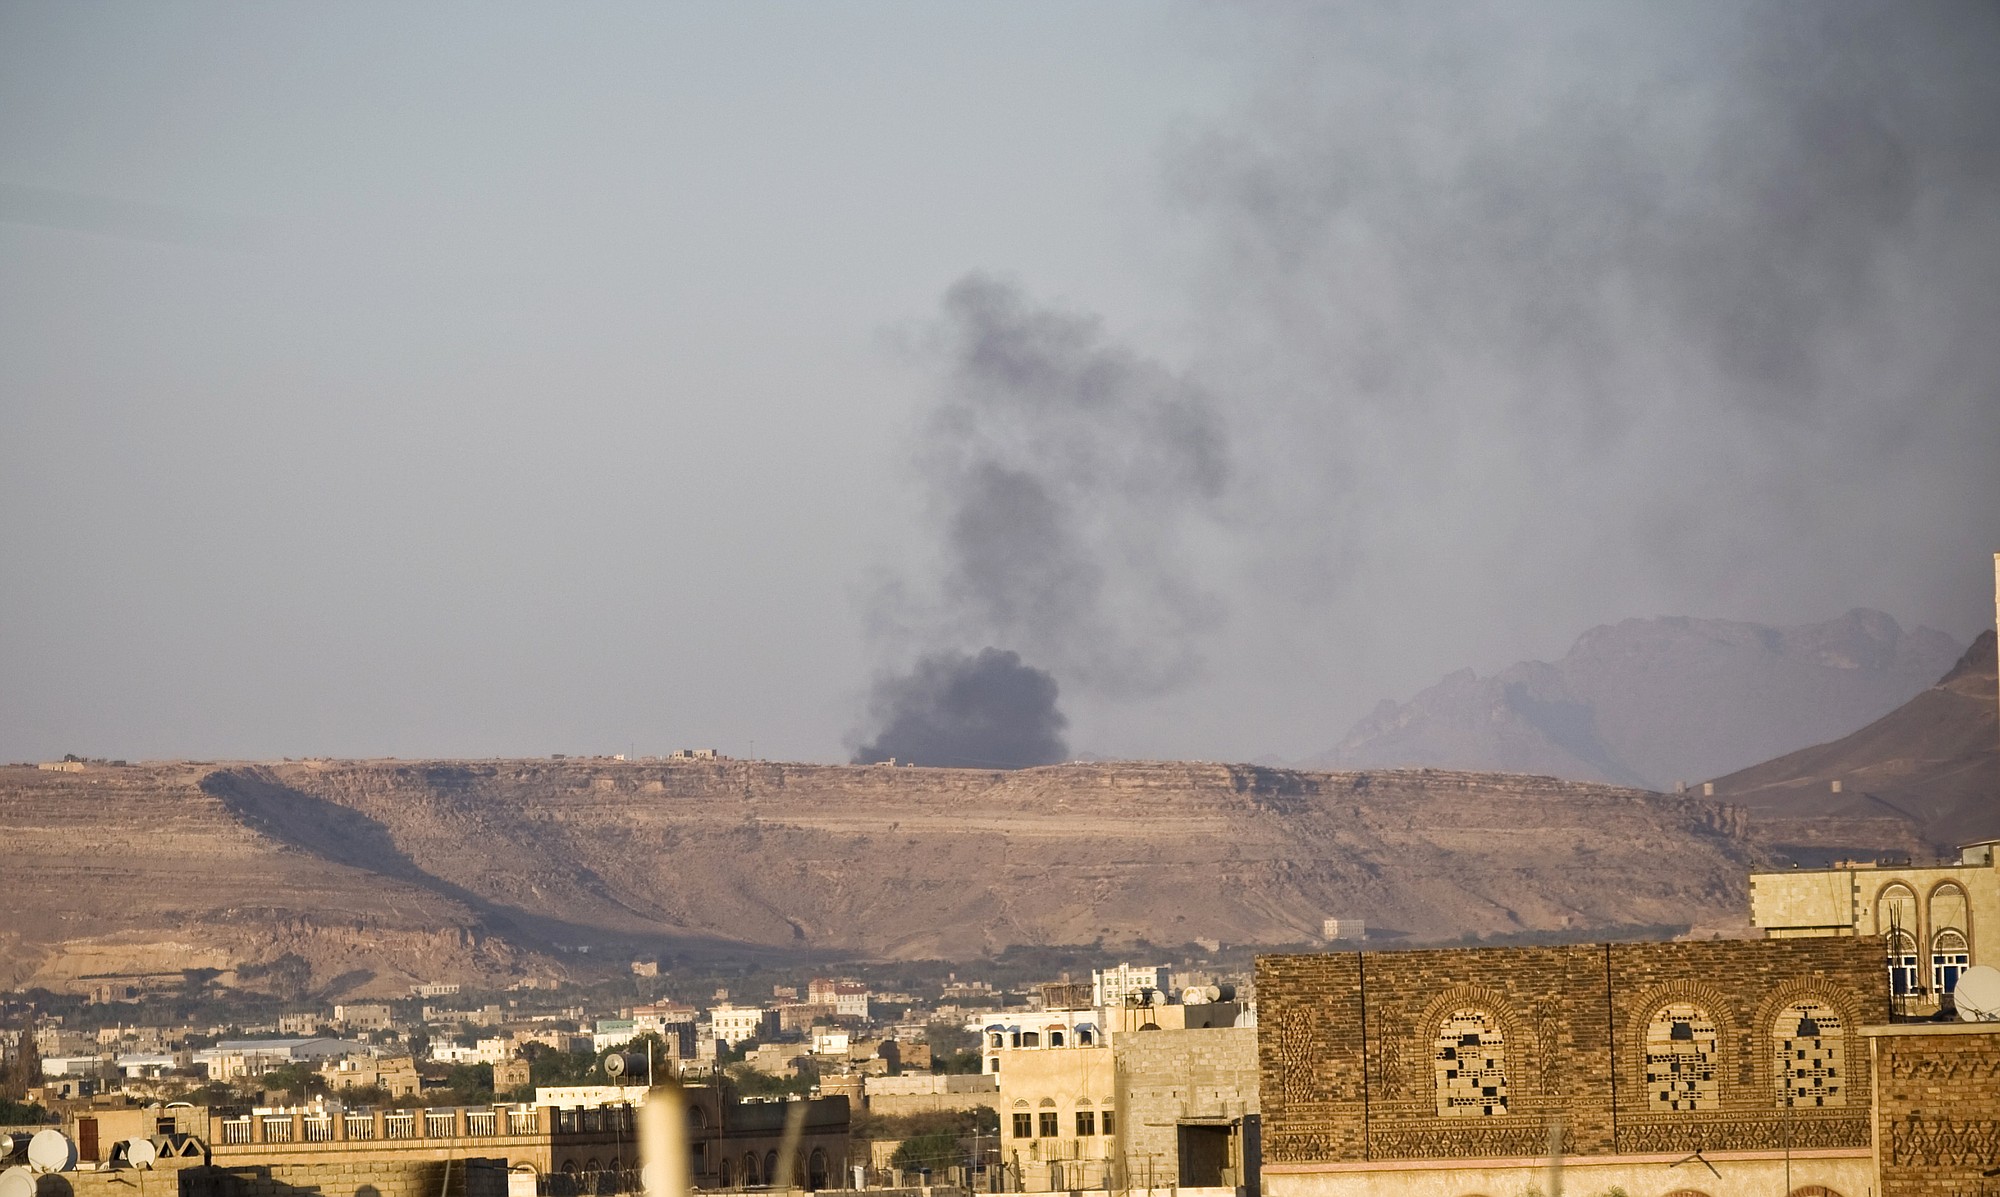 Smoke rises from an area due to Saudi-led airstrikes in Sanaa, Yemen, on Monday.